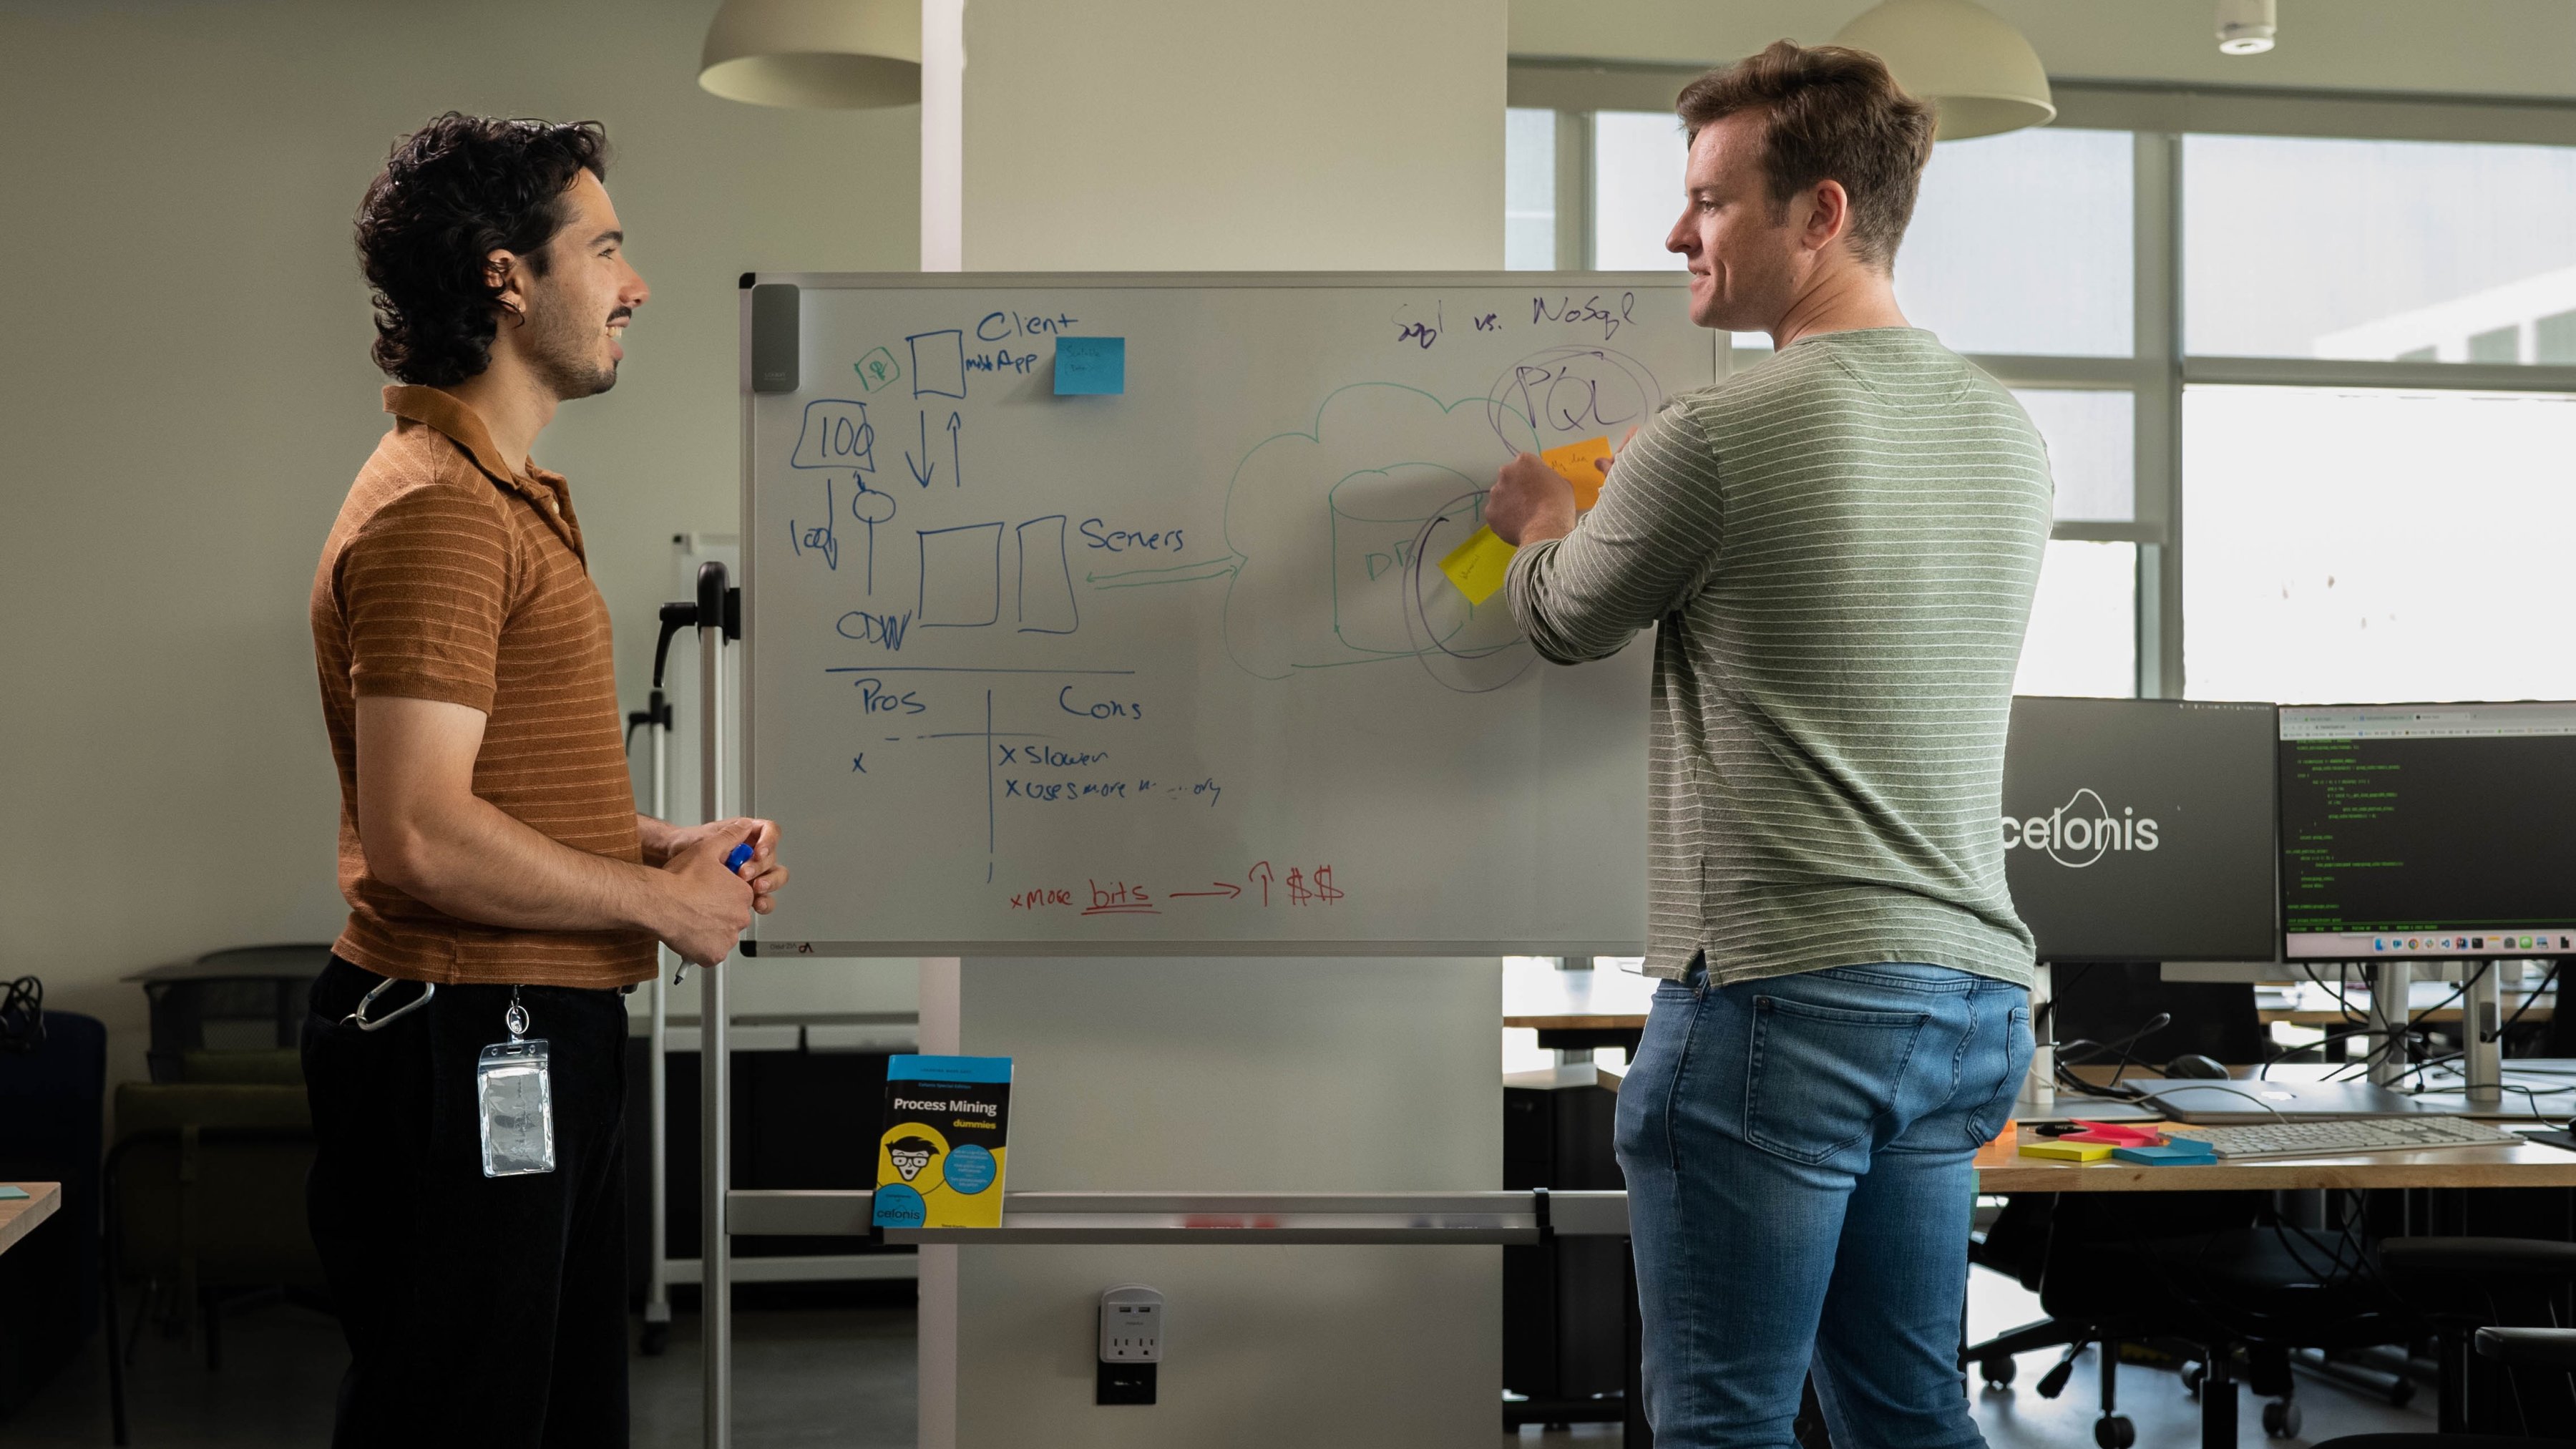 Celonis software engineers Aaron Girard (left) and Alex Monroe (right) work at a whiteboard in the LA office